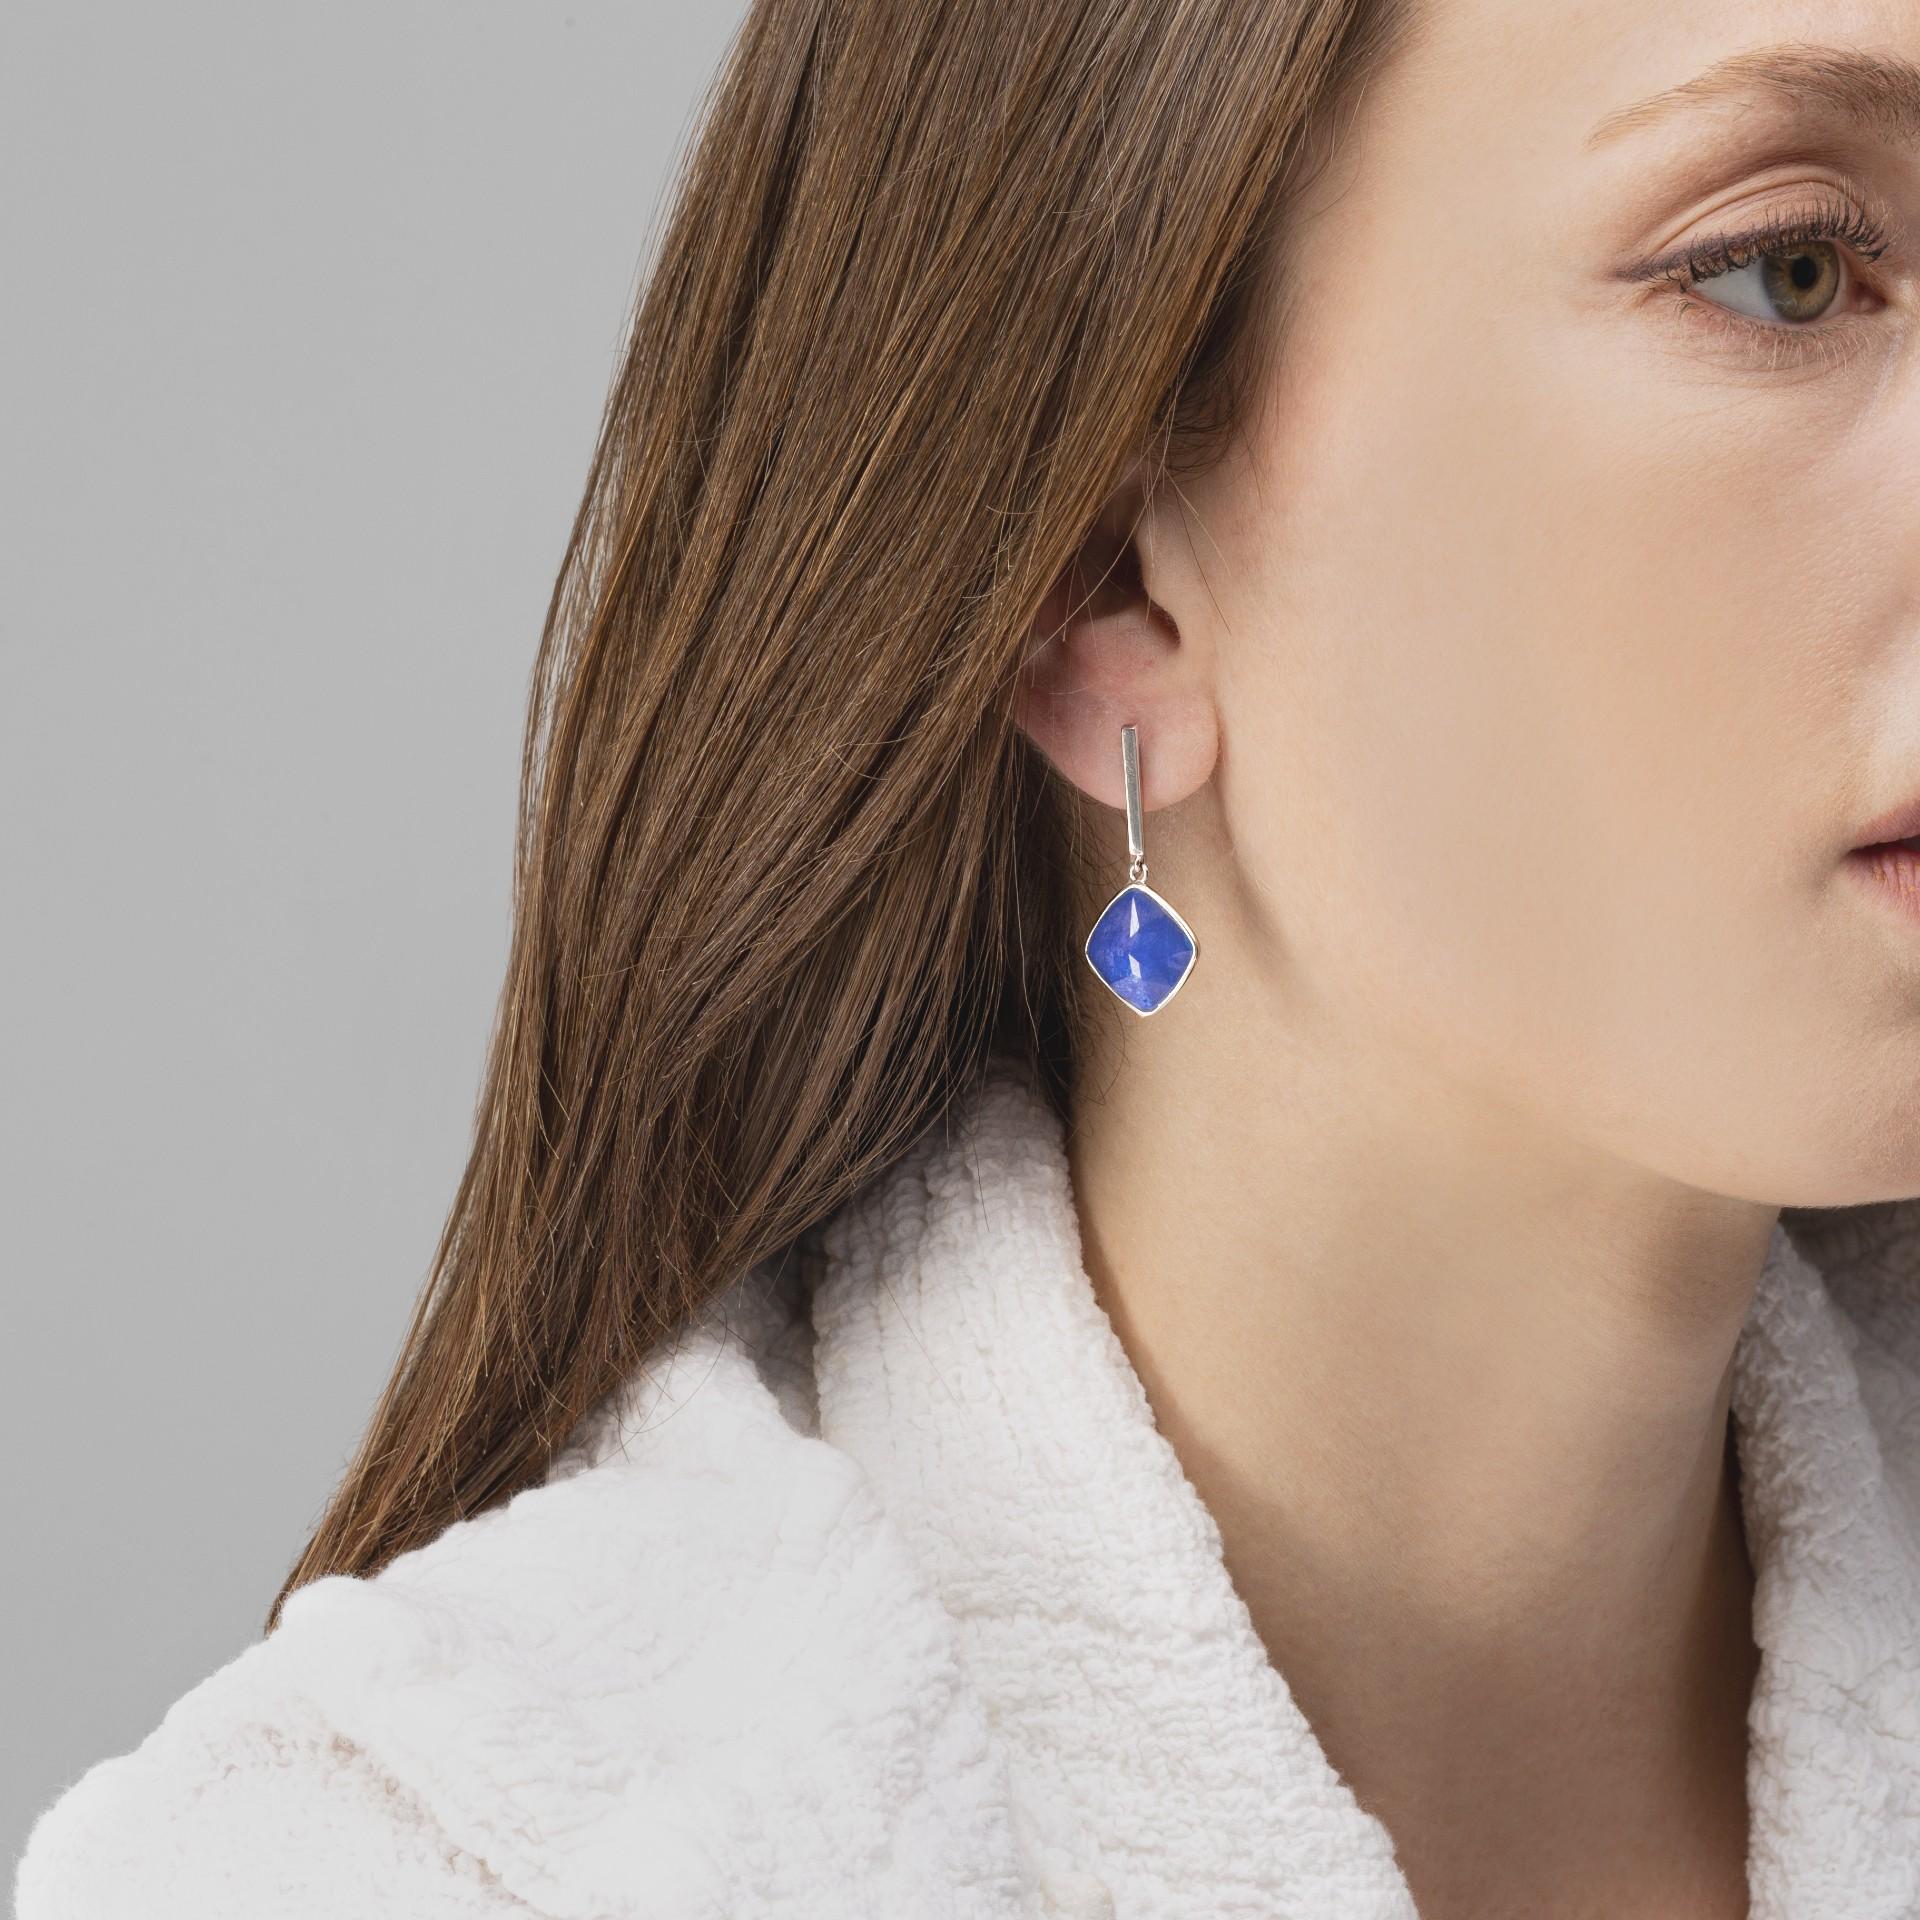 Alex Jona design collection, hand crafted in Italy, 18 Karat white gold drop earrings set with a crazy cut Quartz over Blue Sapphire. Dimensions : Length mm37/in1.46 - Width mm16.8/in0.66

Alex Jona jewels stand out, not only for their special